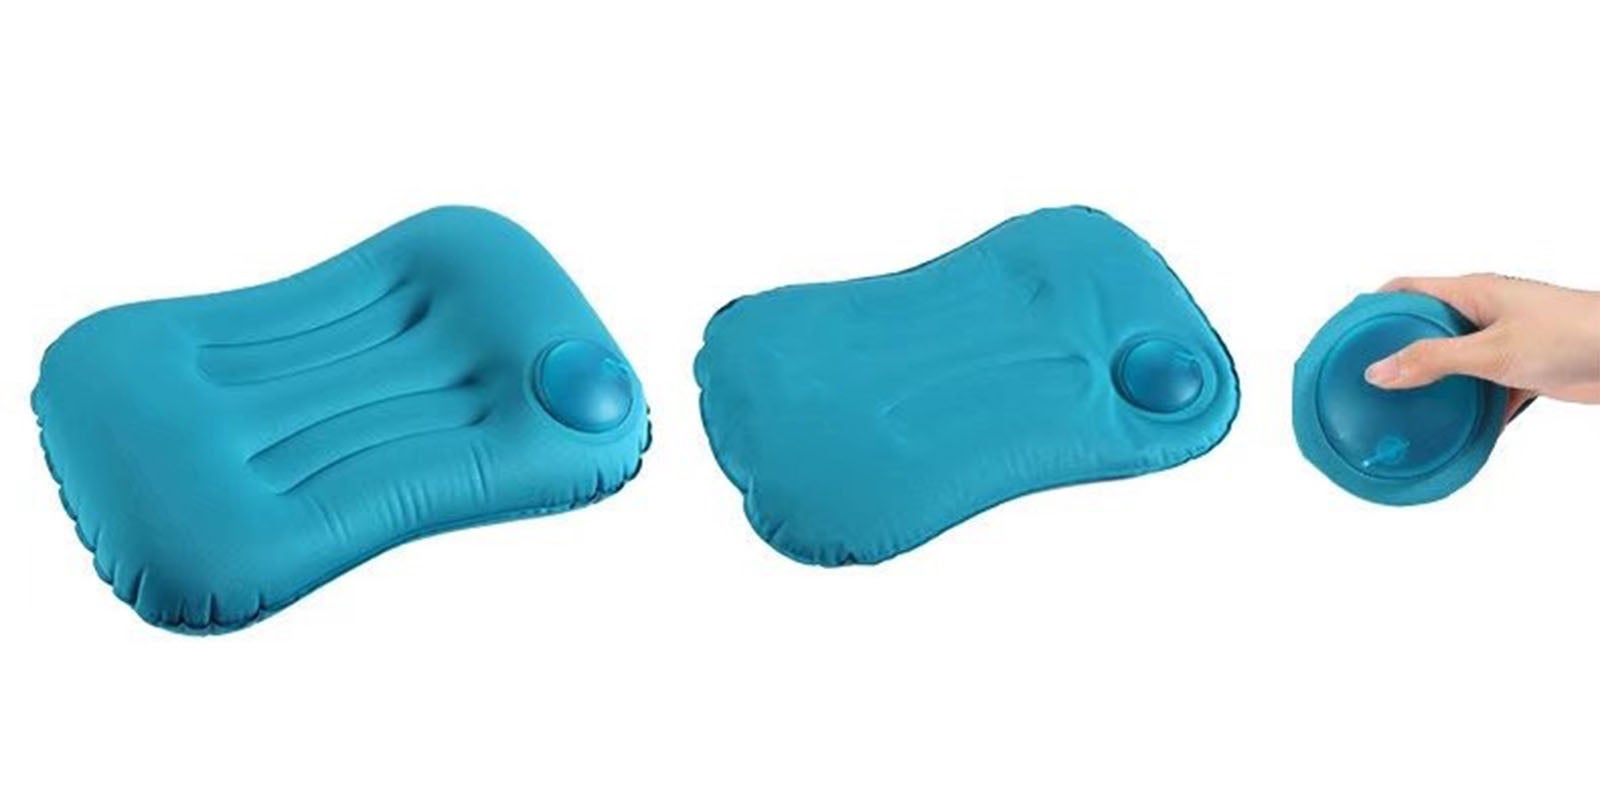 Catzon Travel Pillow Ultralight Inflatable PVC Nylon Sleep Cushion Bedroom Ourdoor Camping Backpacking pillow-Blue